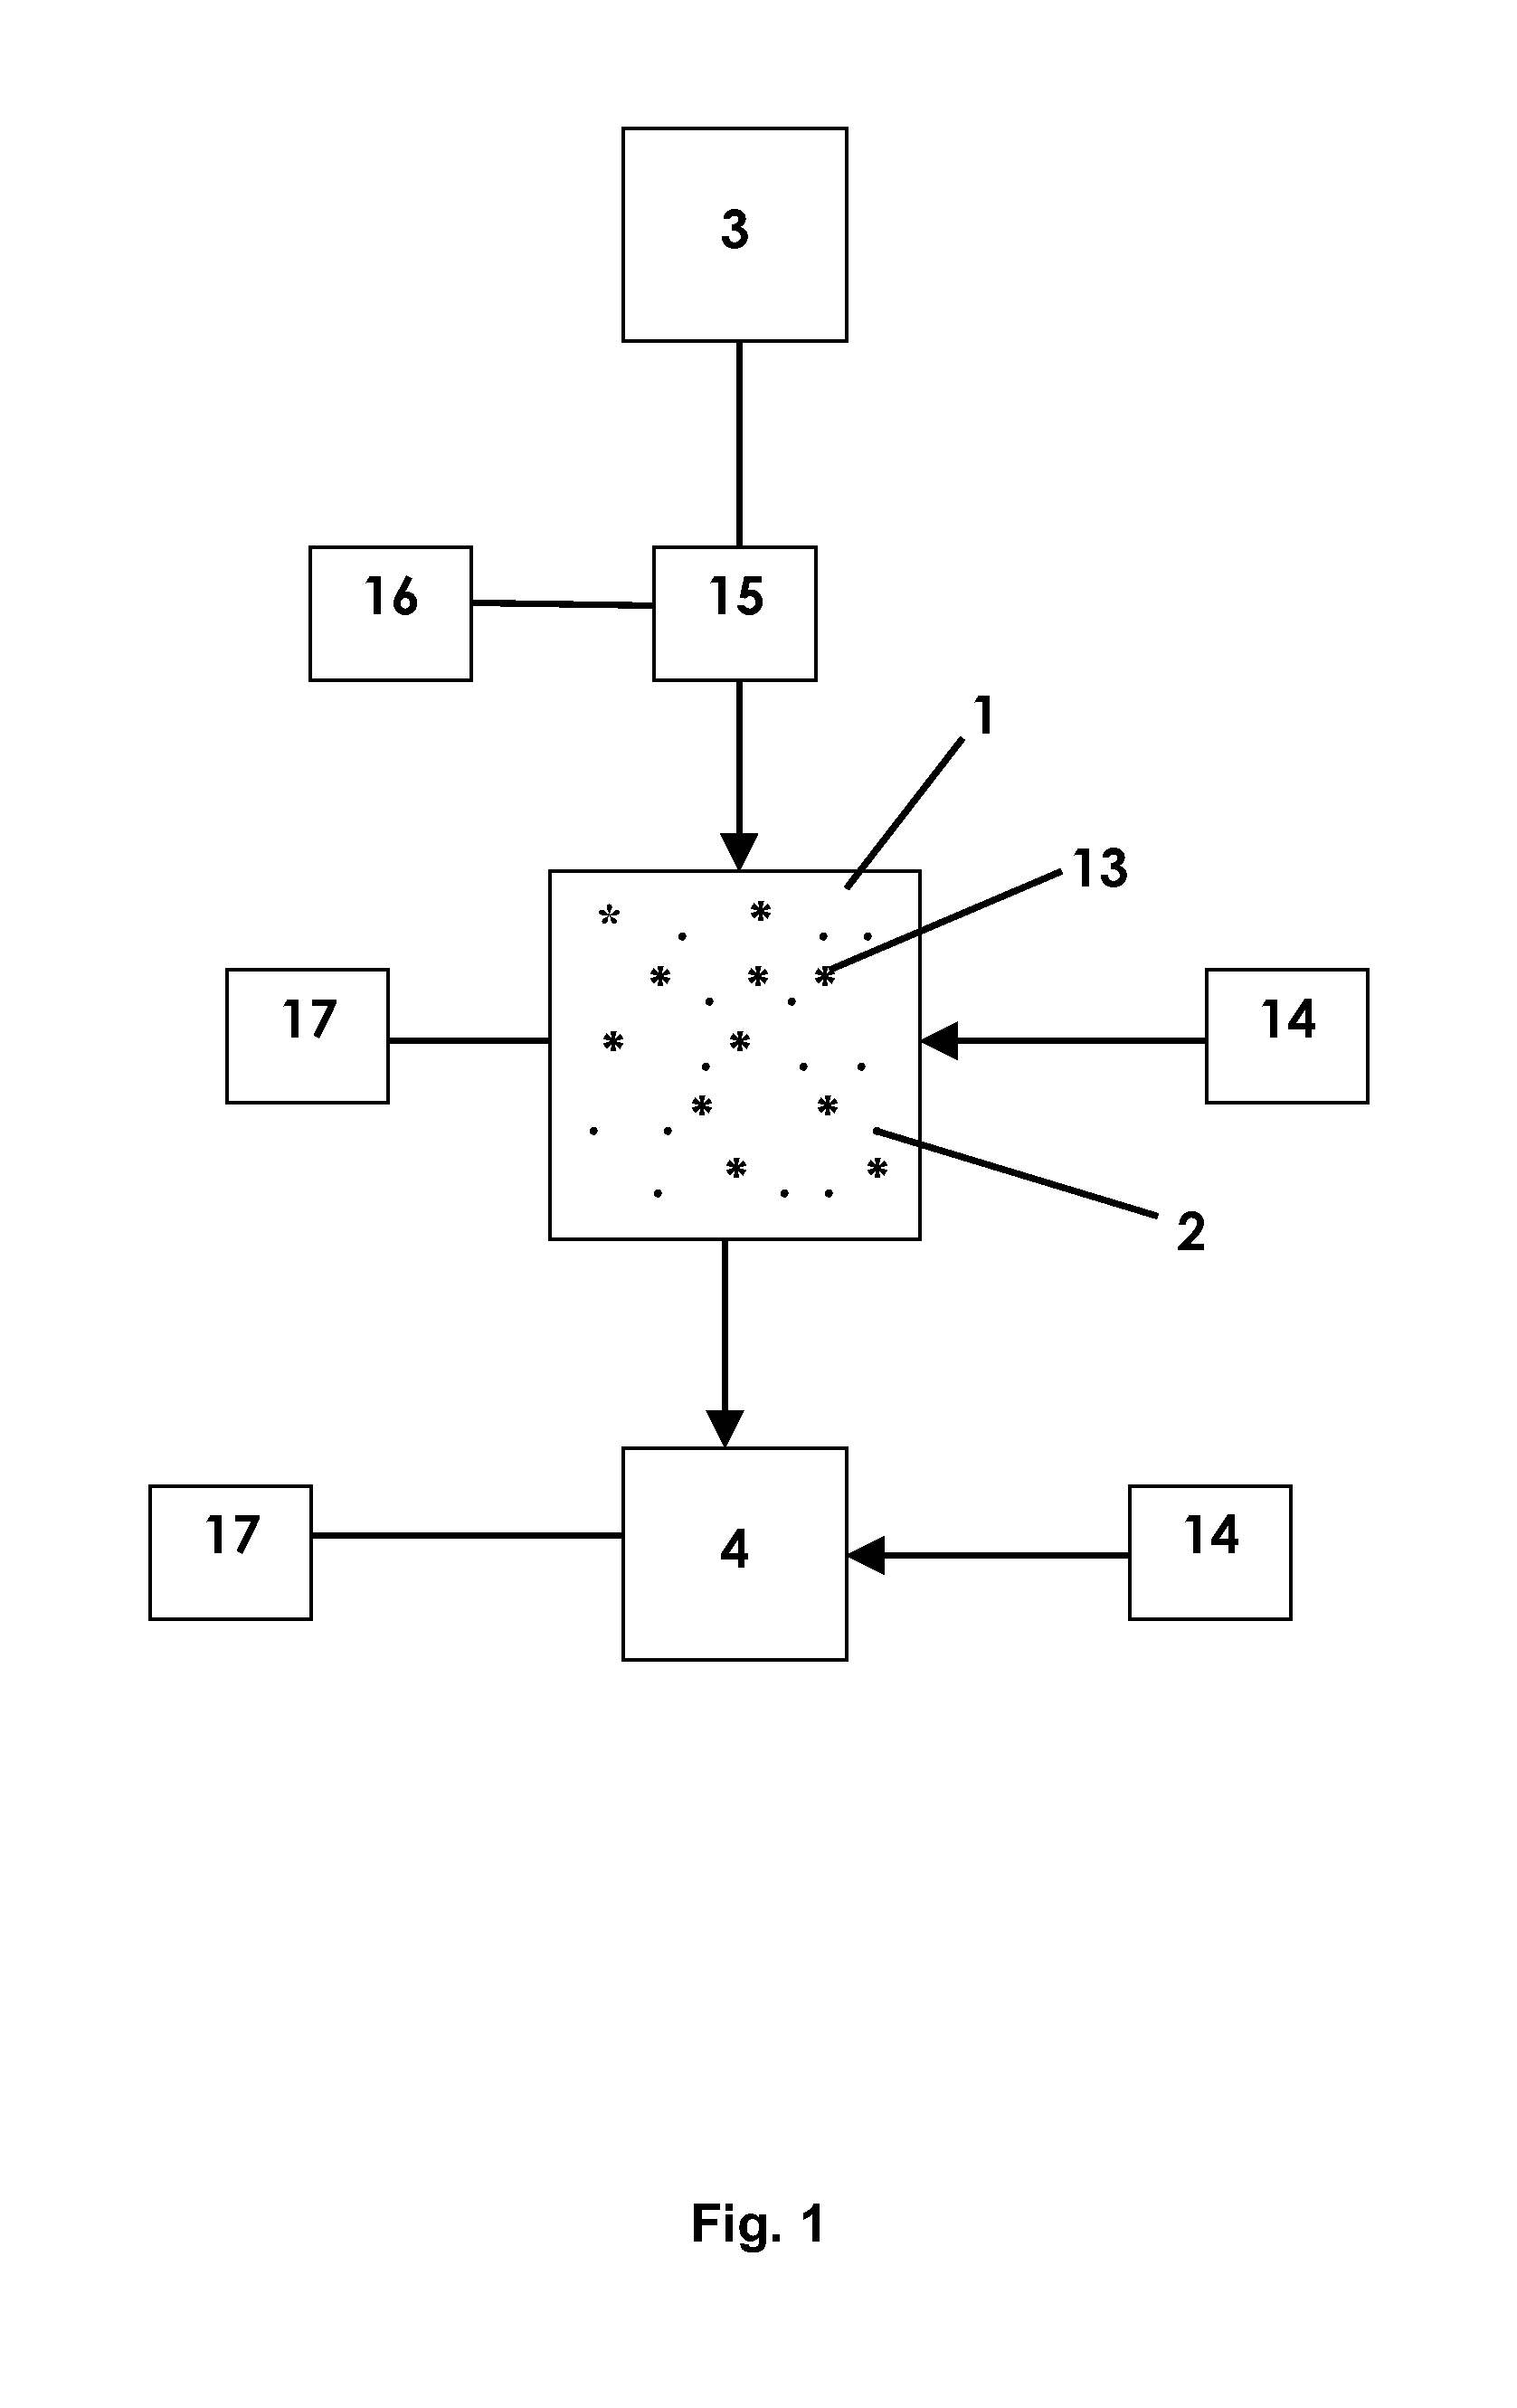 In-situ contaminant remediation systems and methods